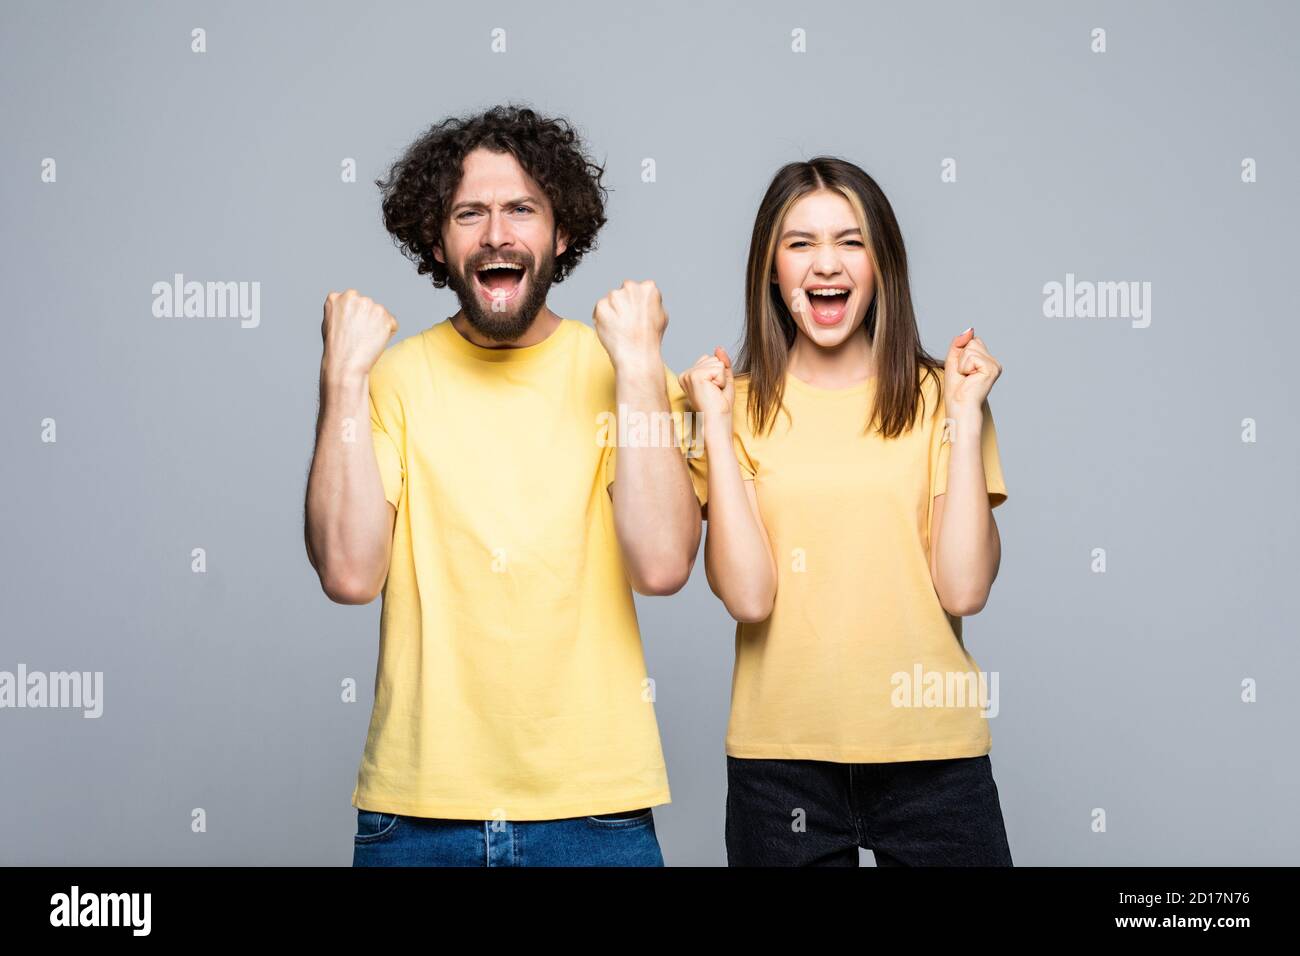 Excited happy young couple winners celebrate win motivated by triumph rejoice victory success together isolated on white grey background Stock Photo